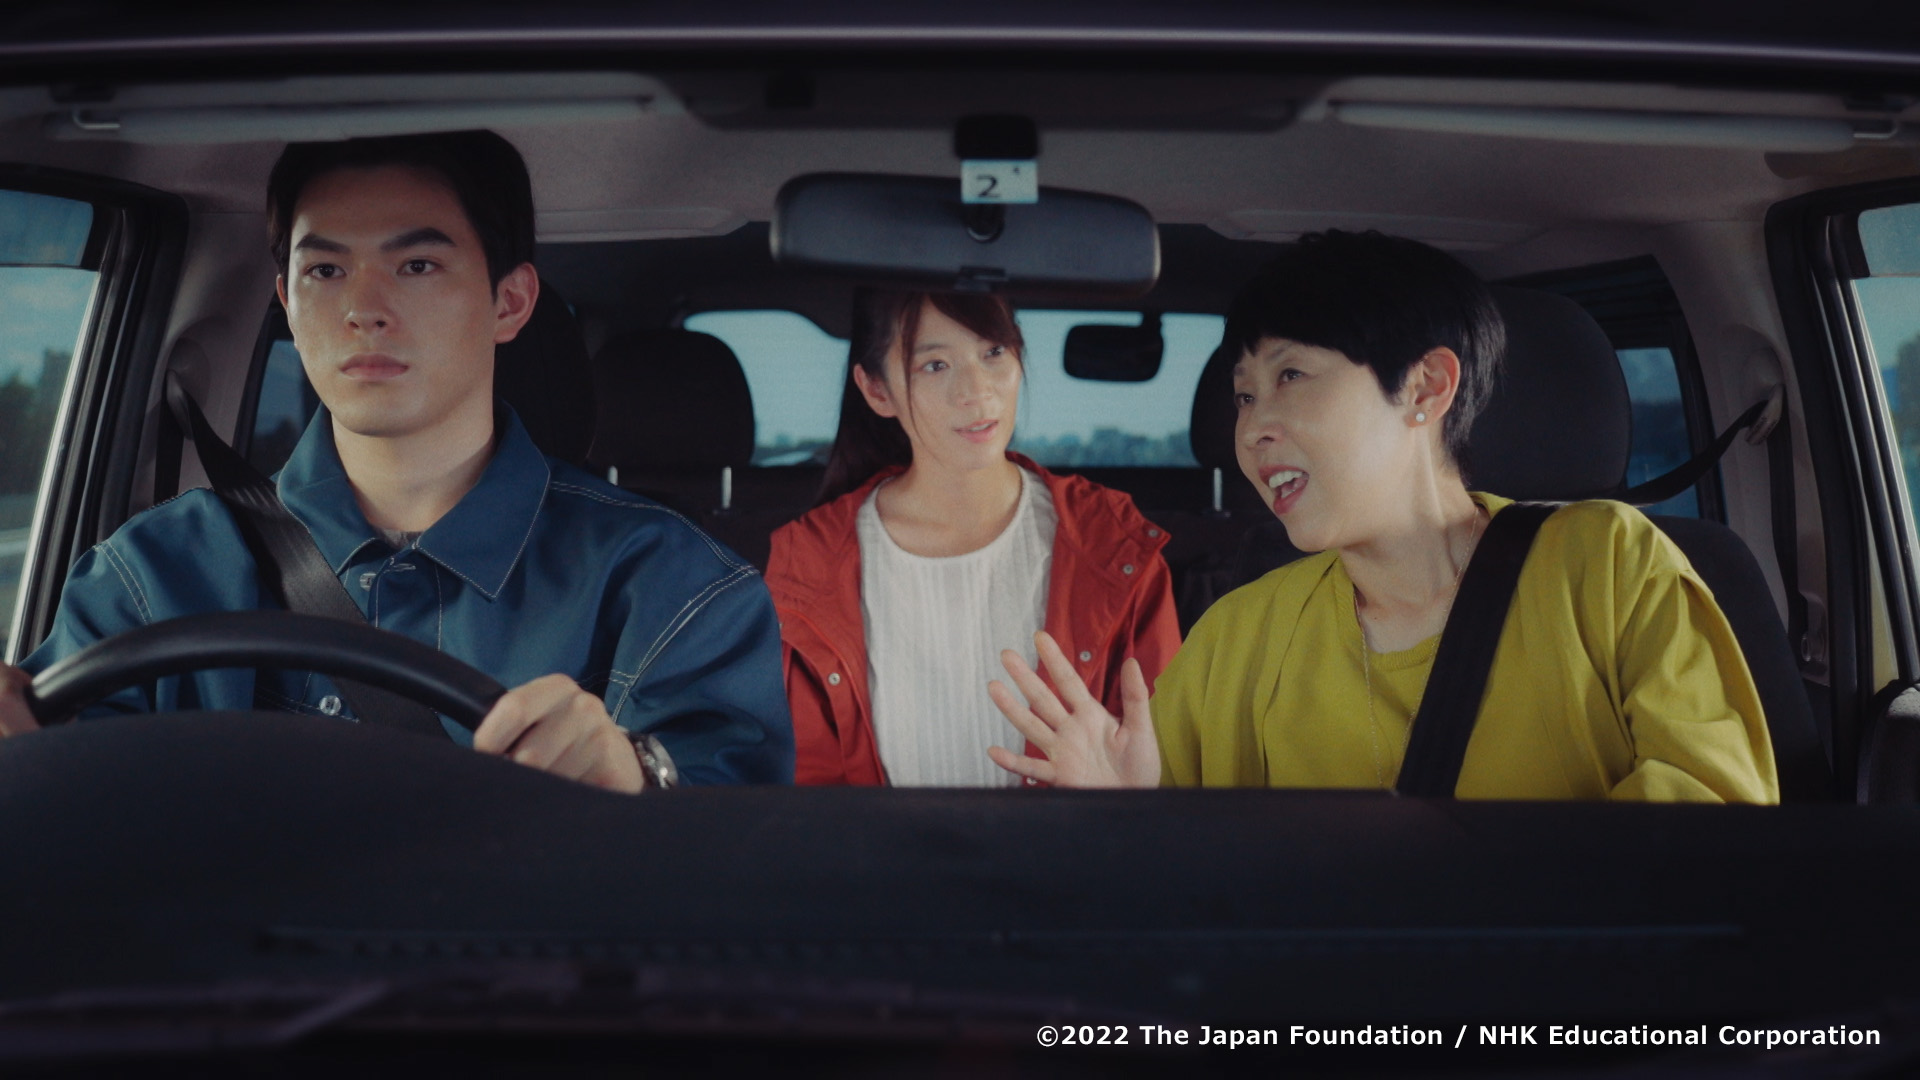 Image of the scene where Xuan and her colleagues are conversing in a car